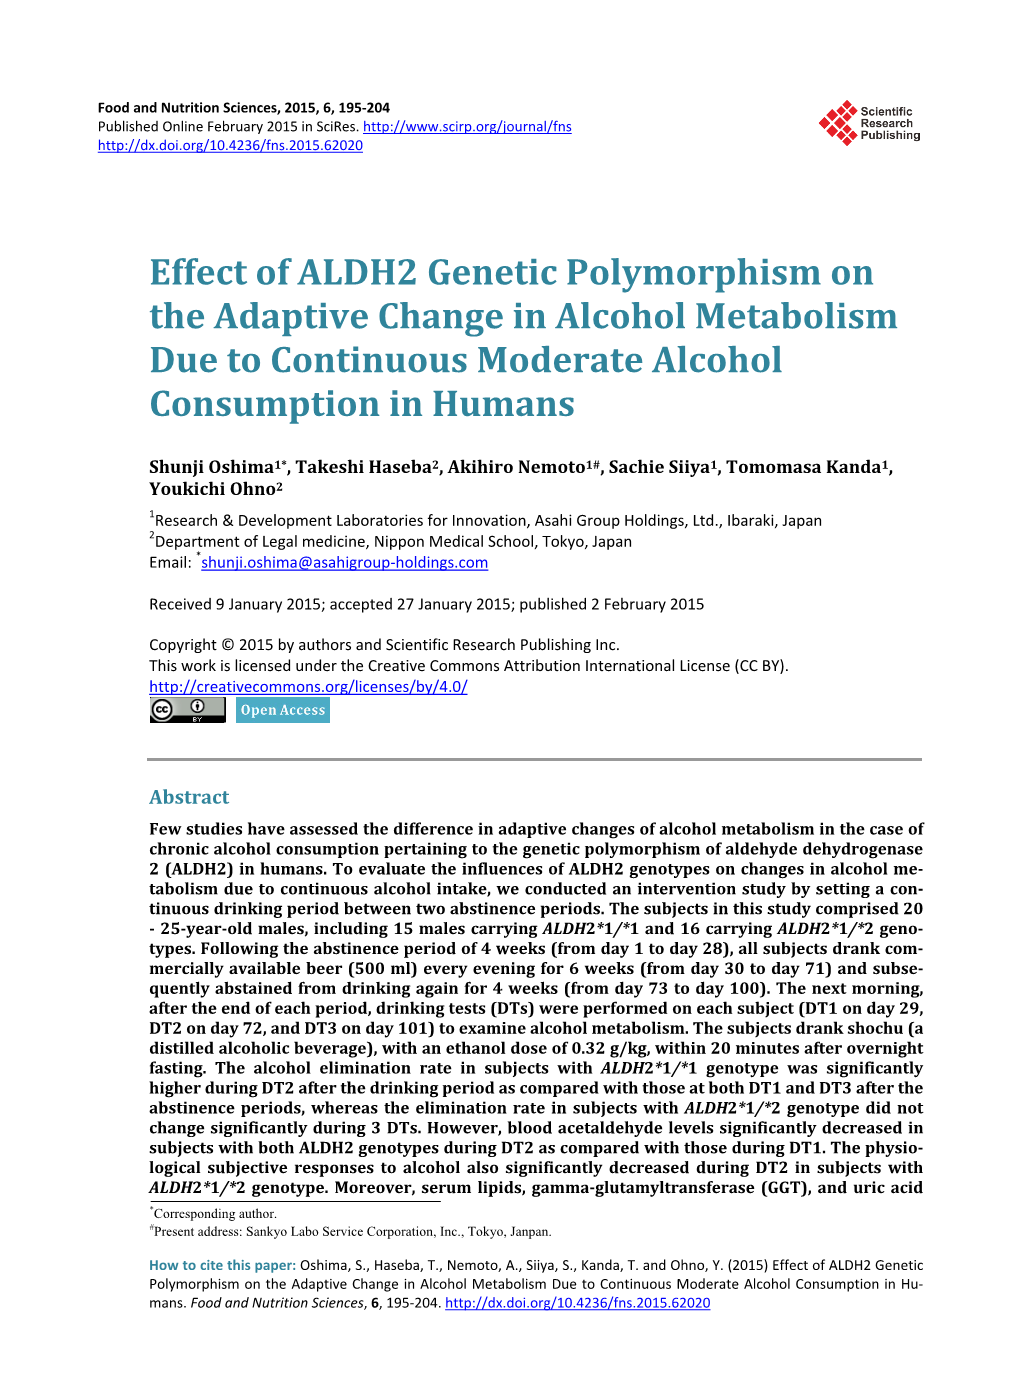 Effect of ALDH2 Genetic Polymorphism on the Adaptive Change in Alcohol Metabolism Due to Continuous Moderate Alcohol Consumption in Humans